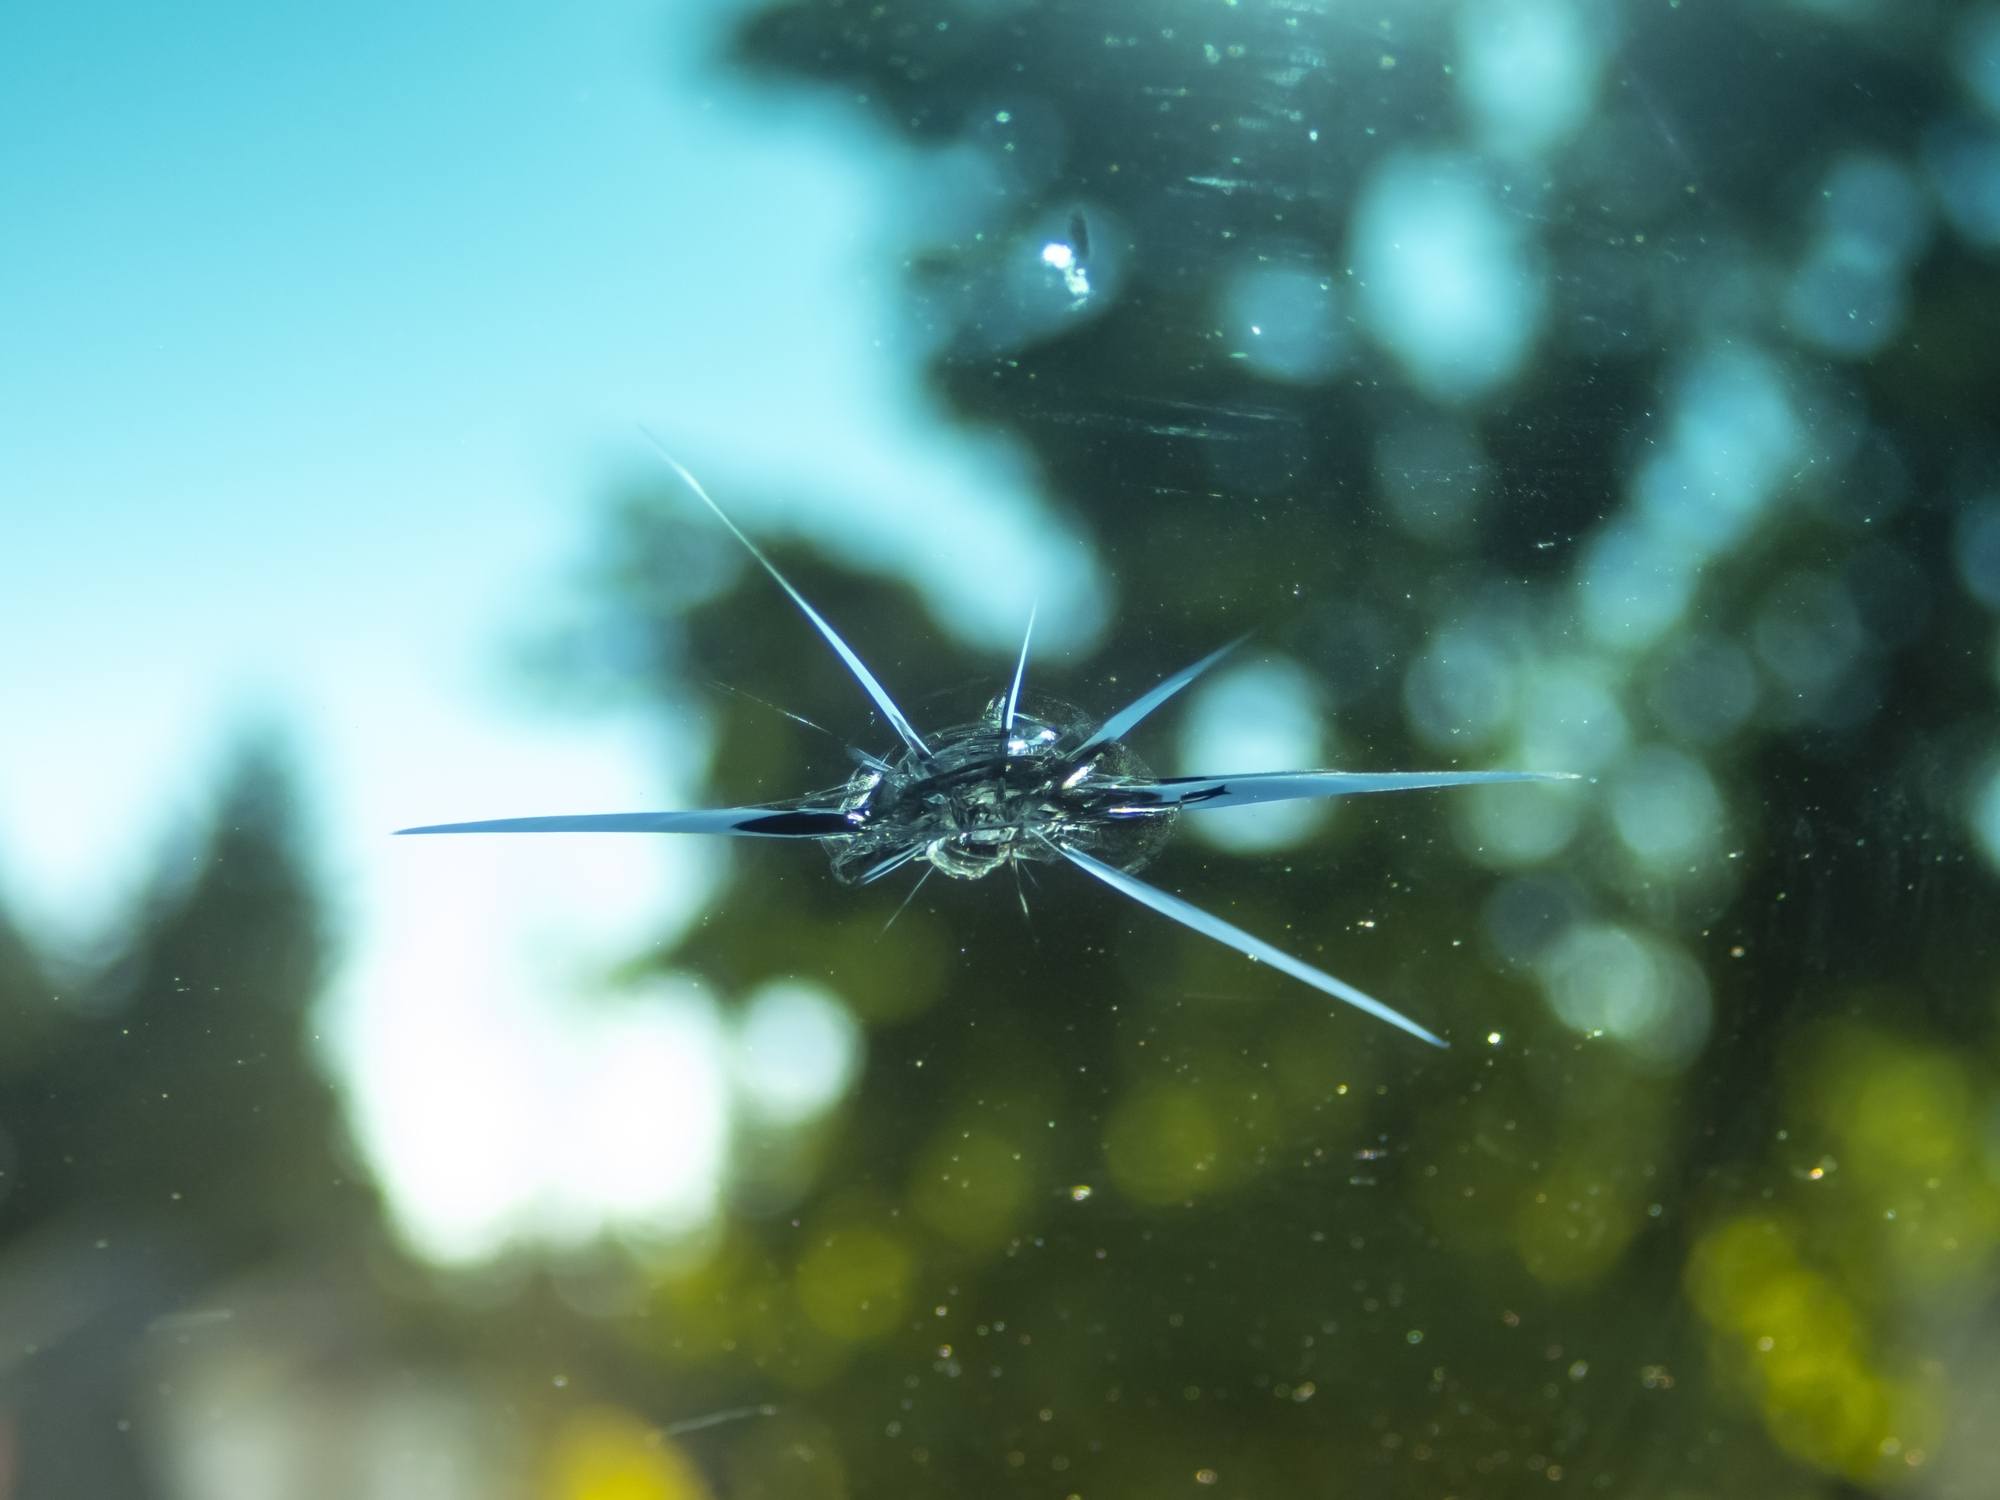 Car windshield with a small rock chip